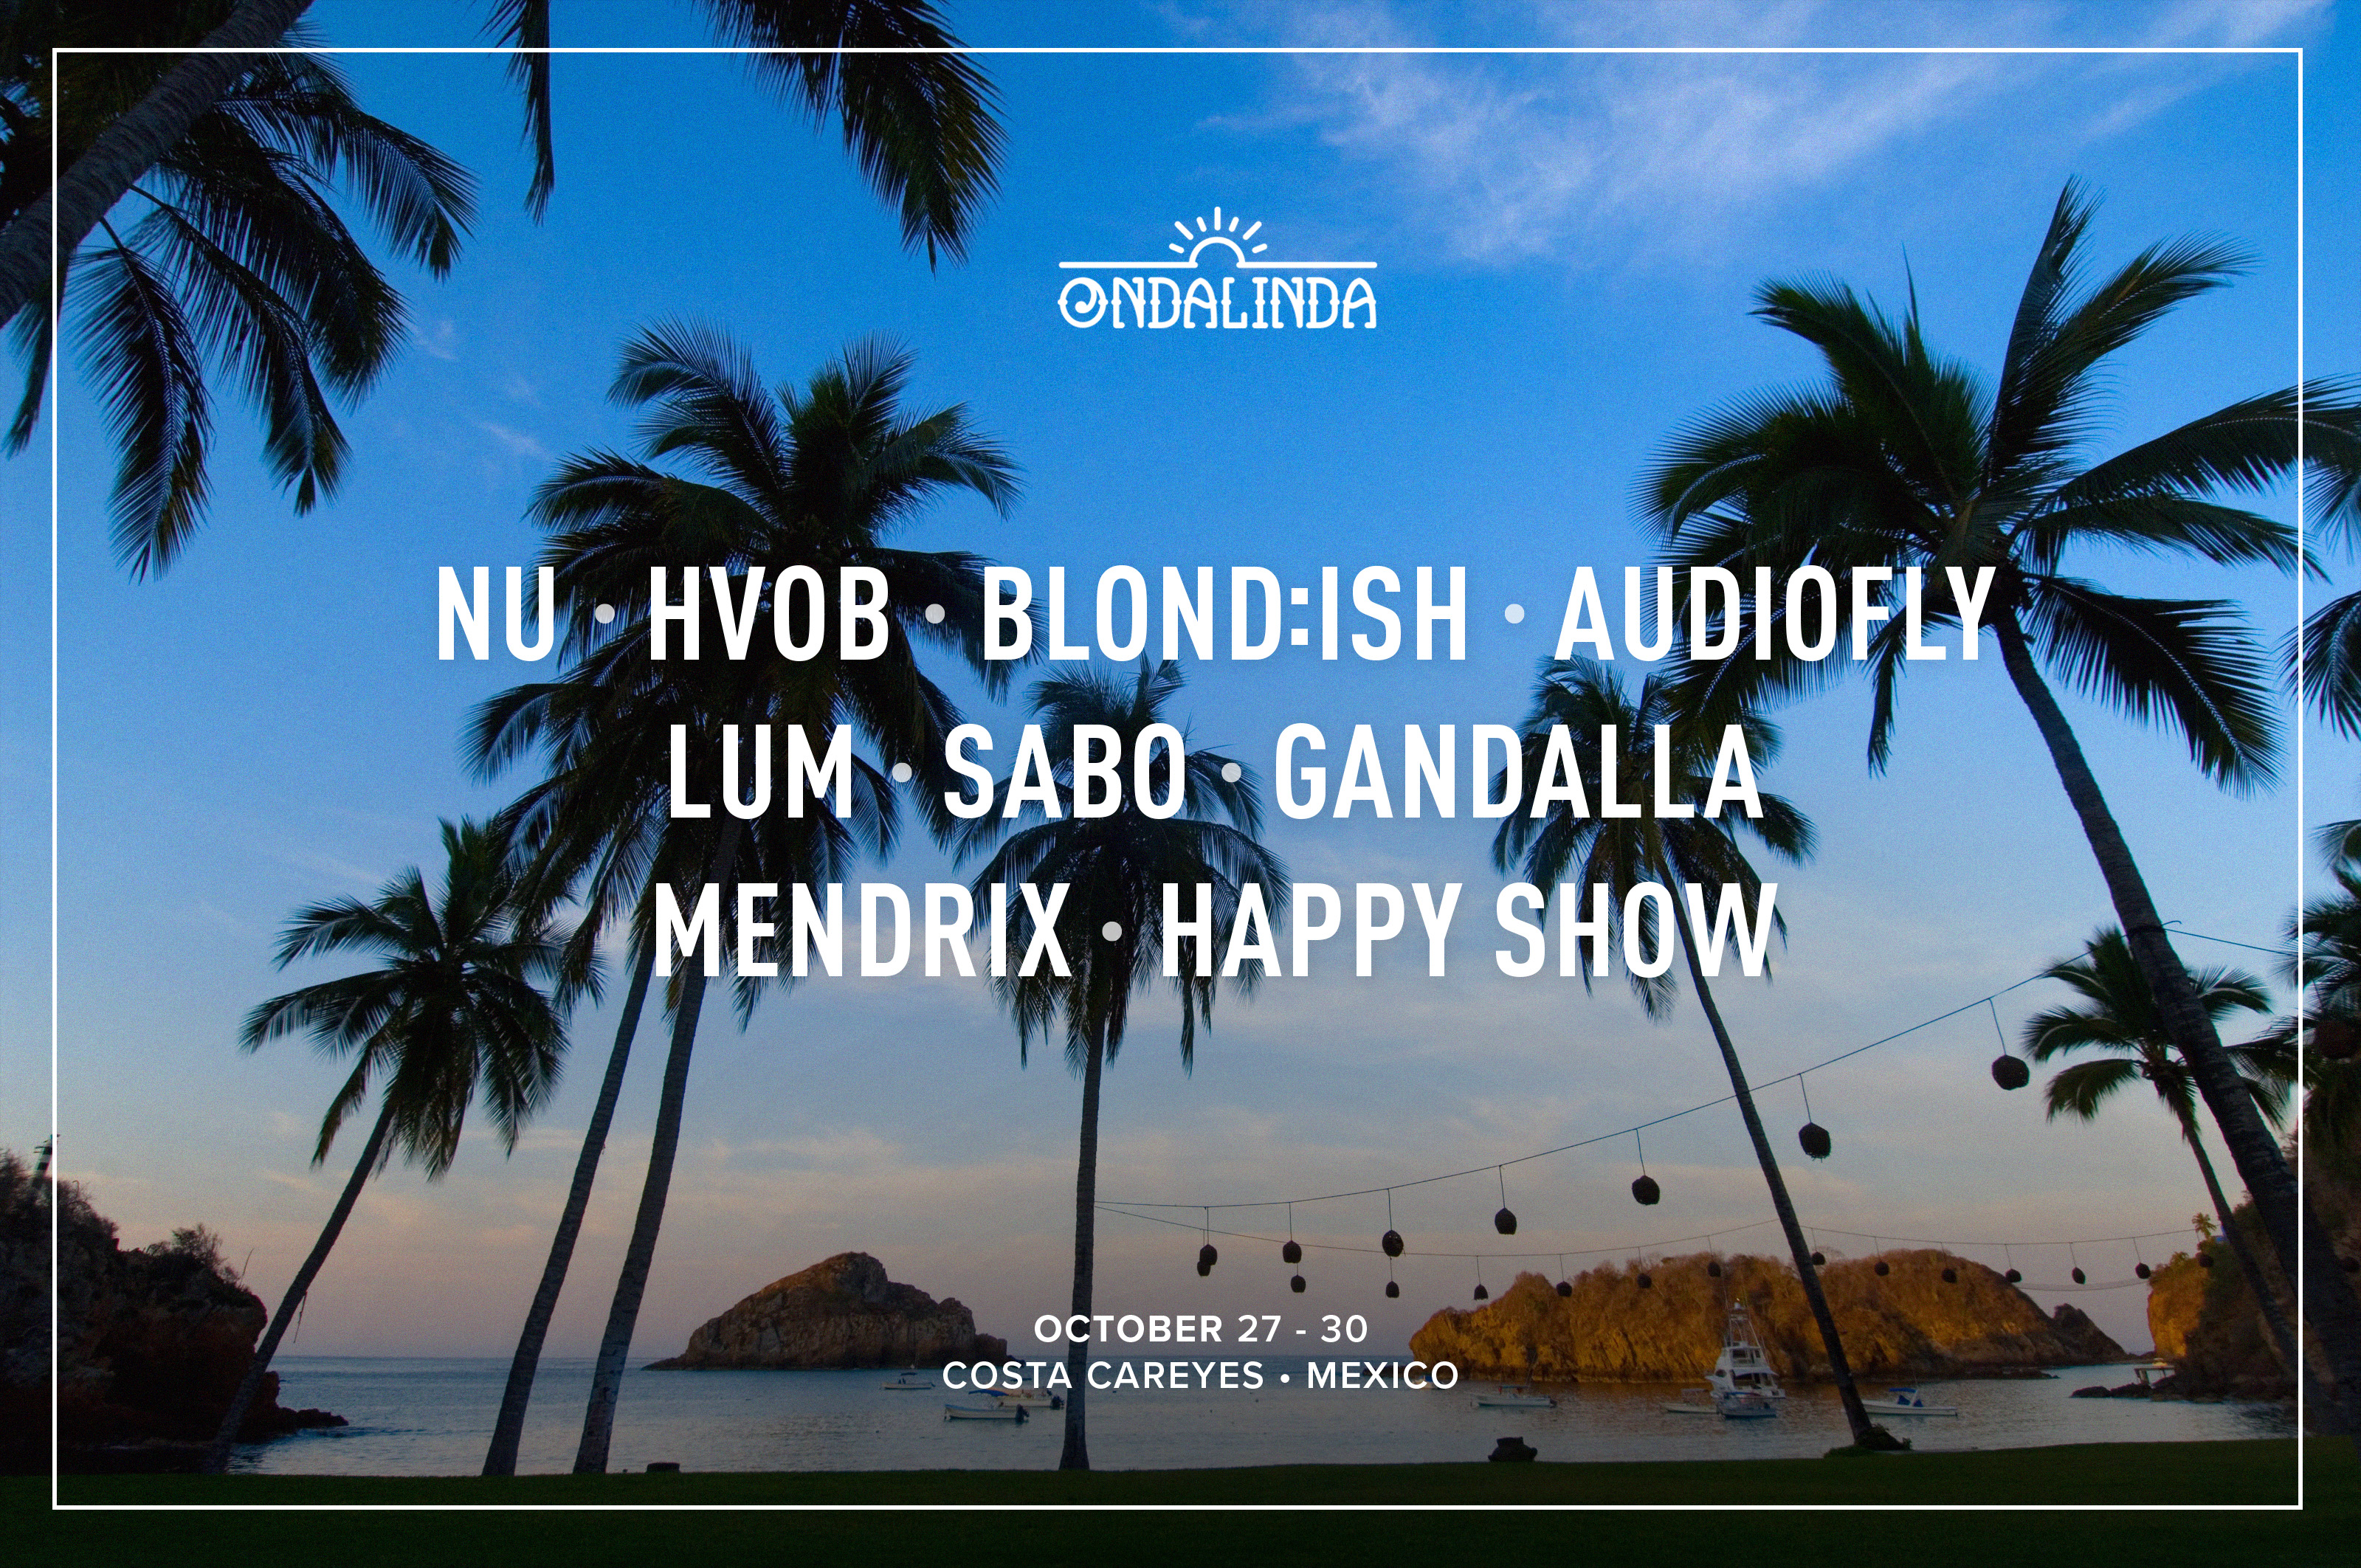 Ondalinda To Bring Mayan Warrior, Hvob, Nu, Blond:Ish, And Audiofly To Breathtaking Beach In Mexico